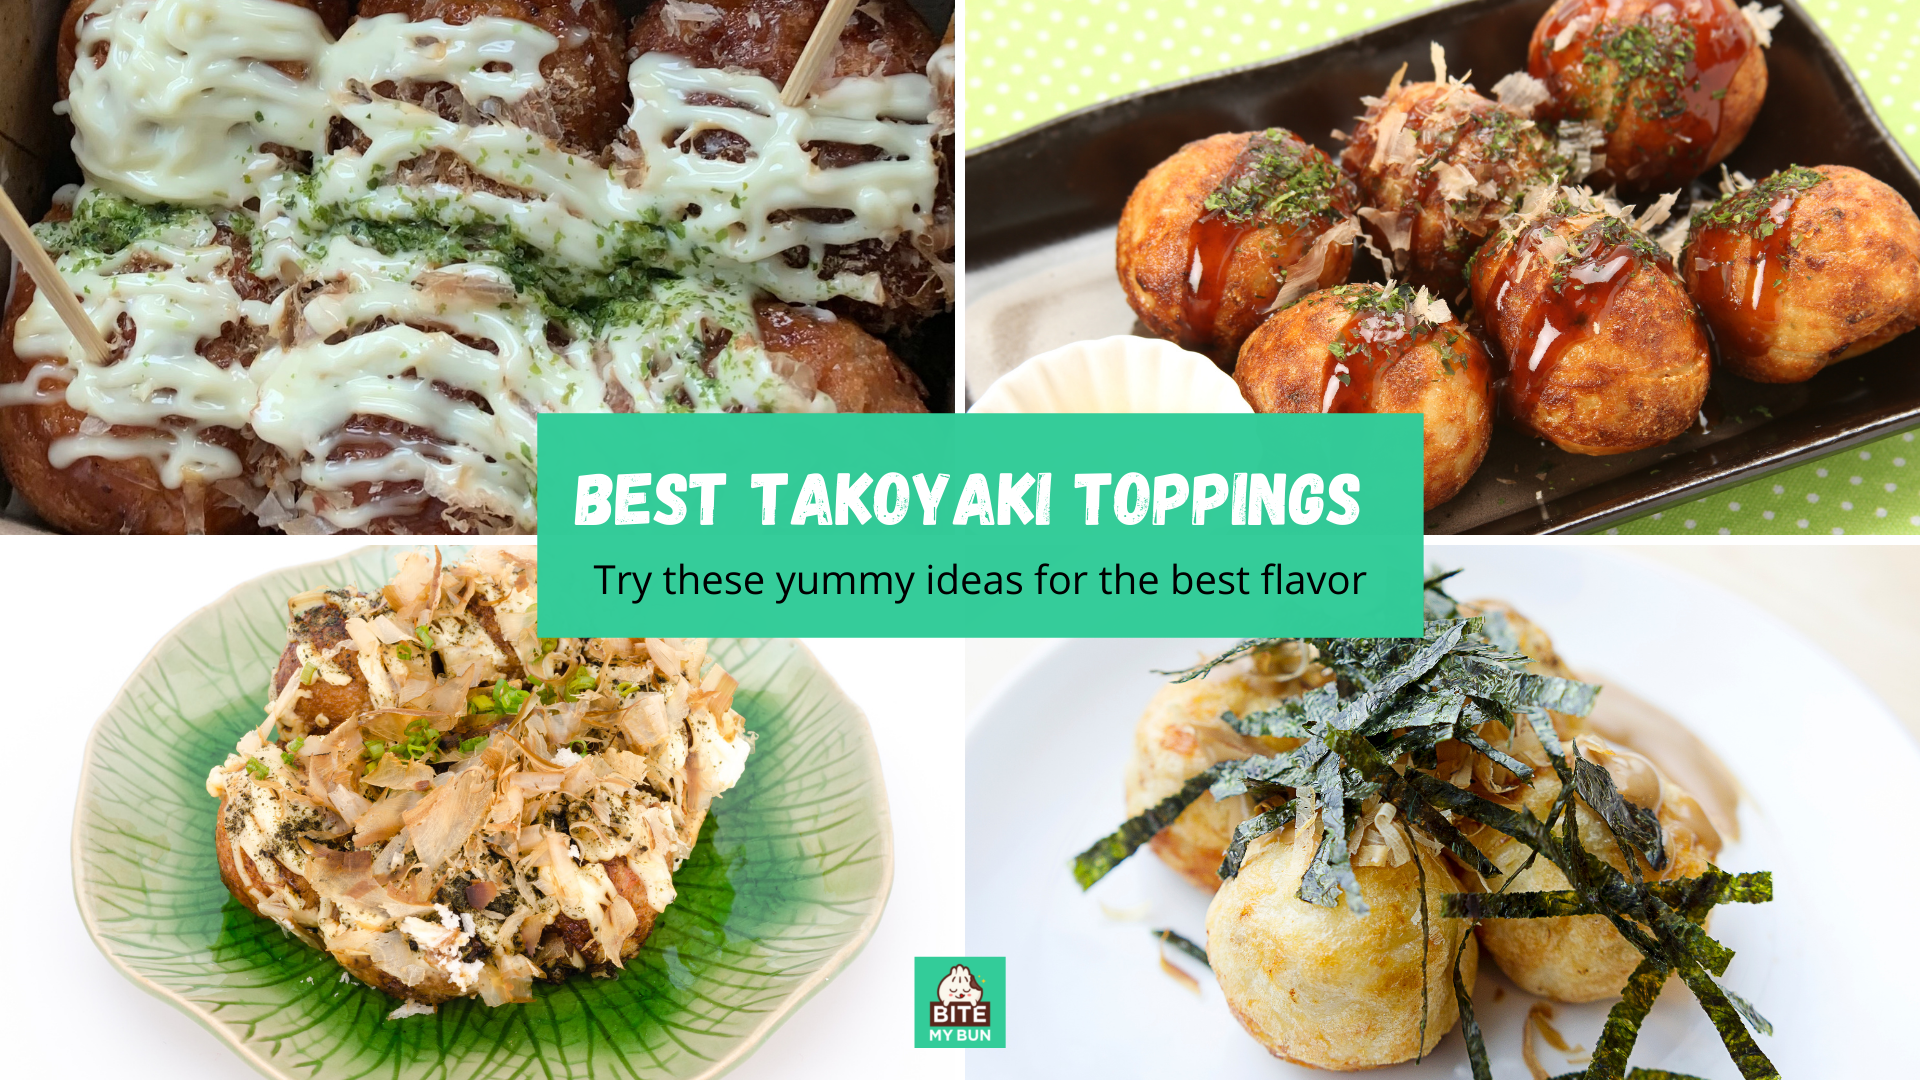 Best takoyaki toppings | Try these yummy ideas for the best flavor